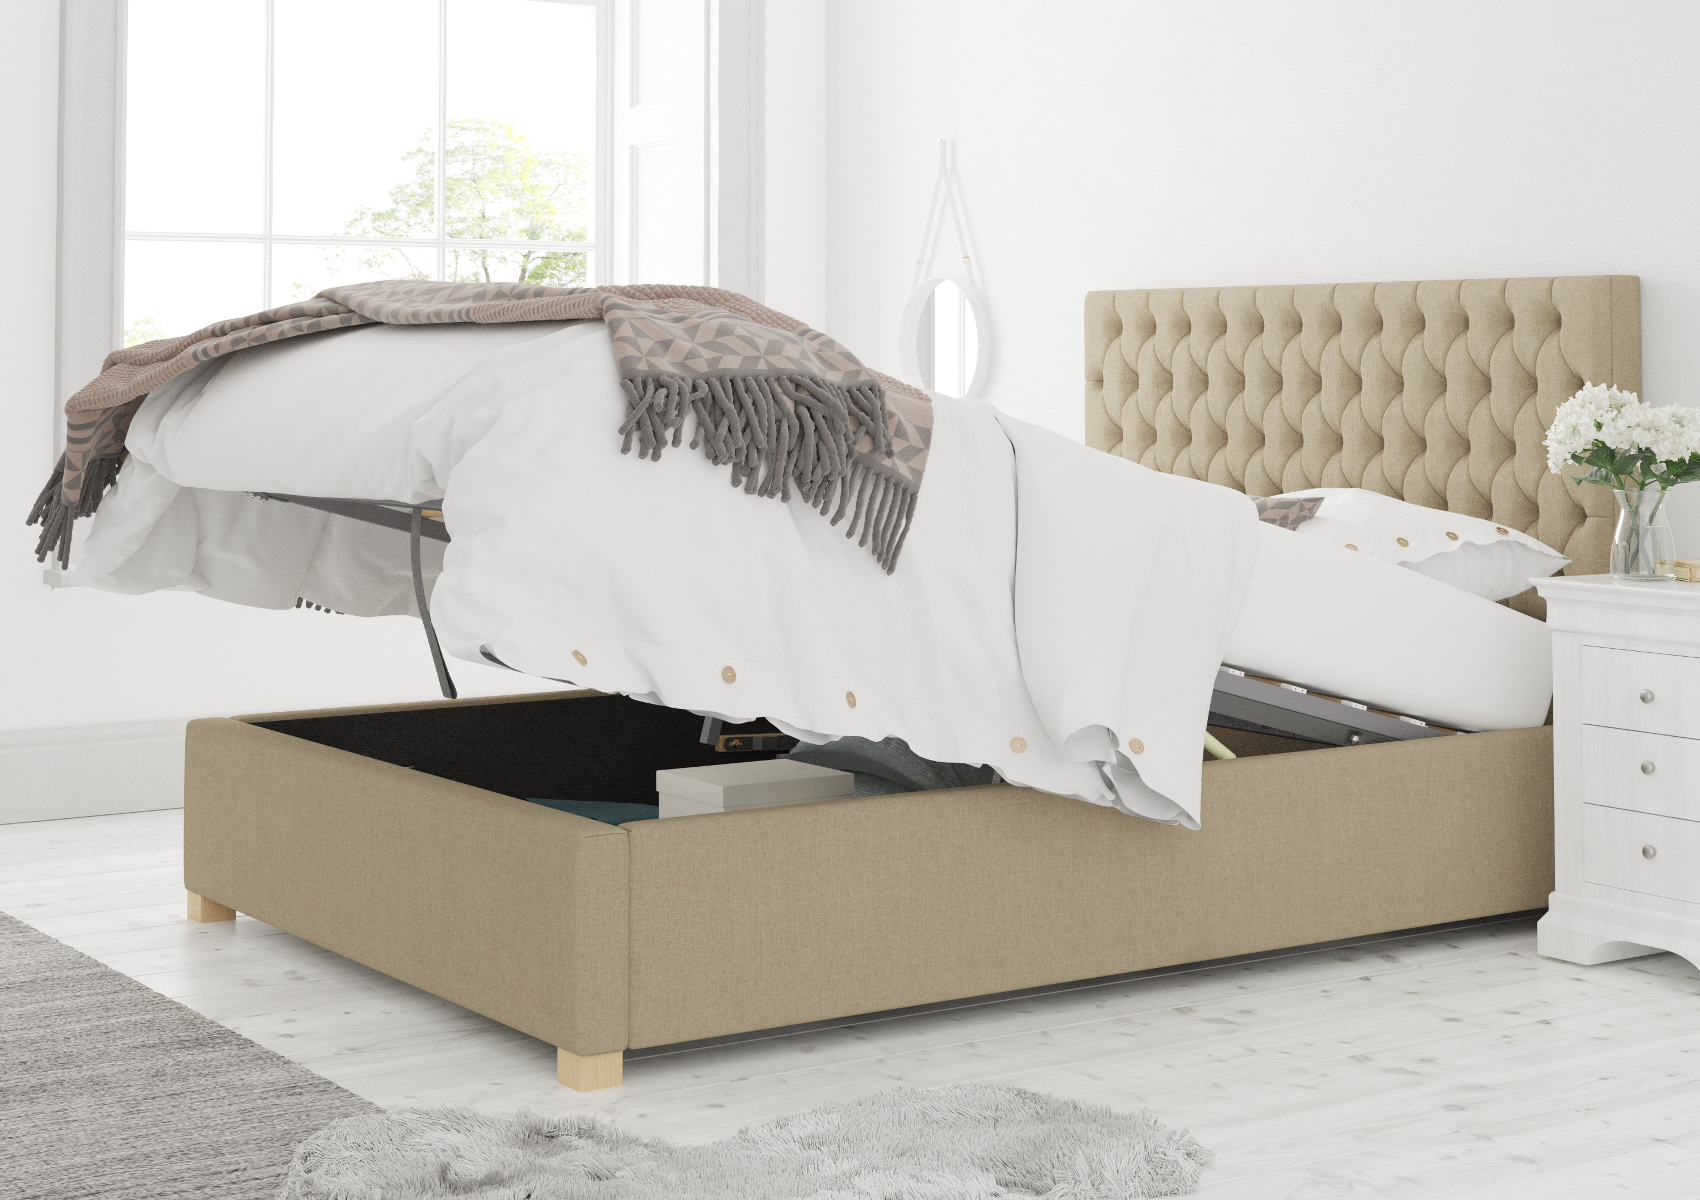 View Malton Natural Upholstered Compact Double Ottoman Bed Time4Sleep information